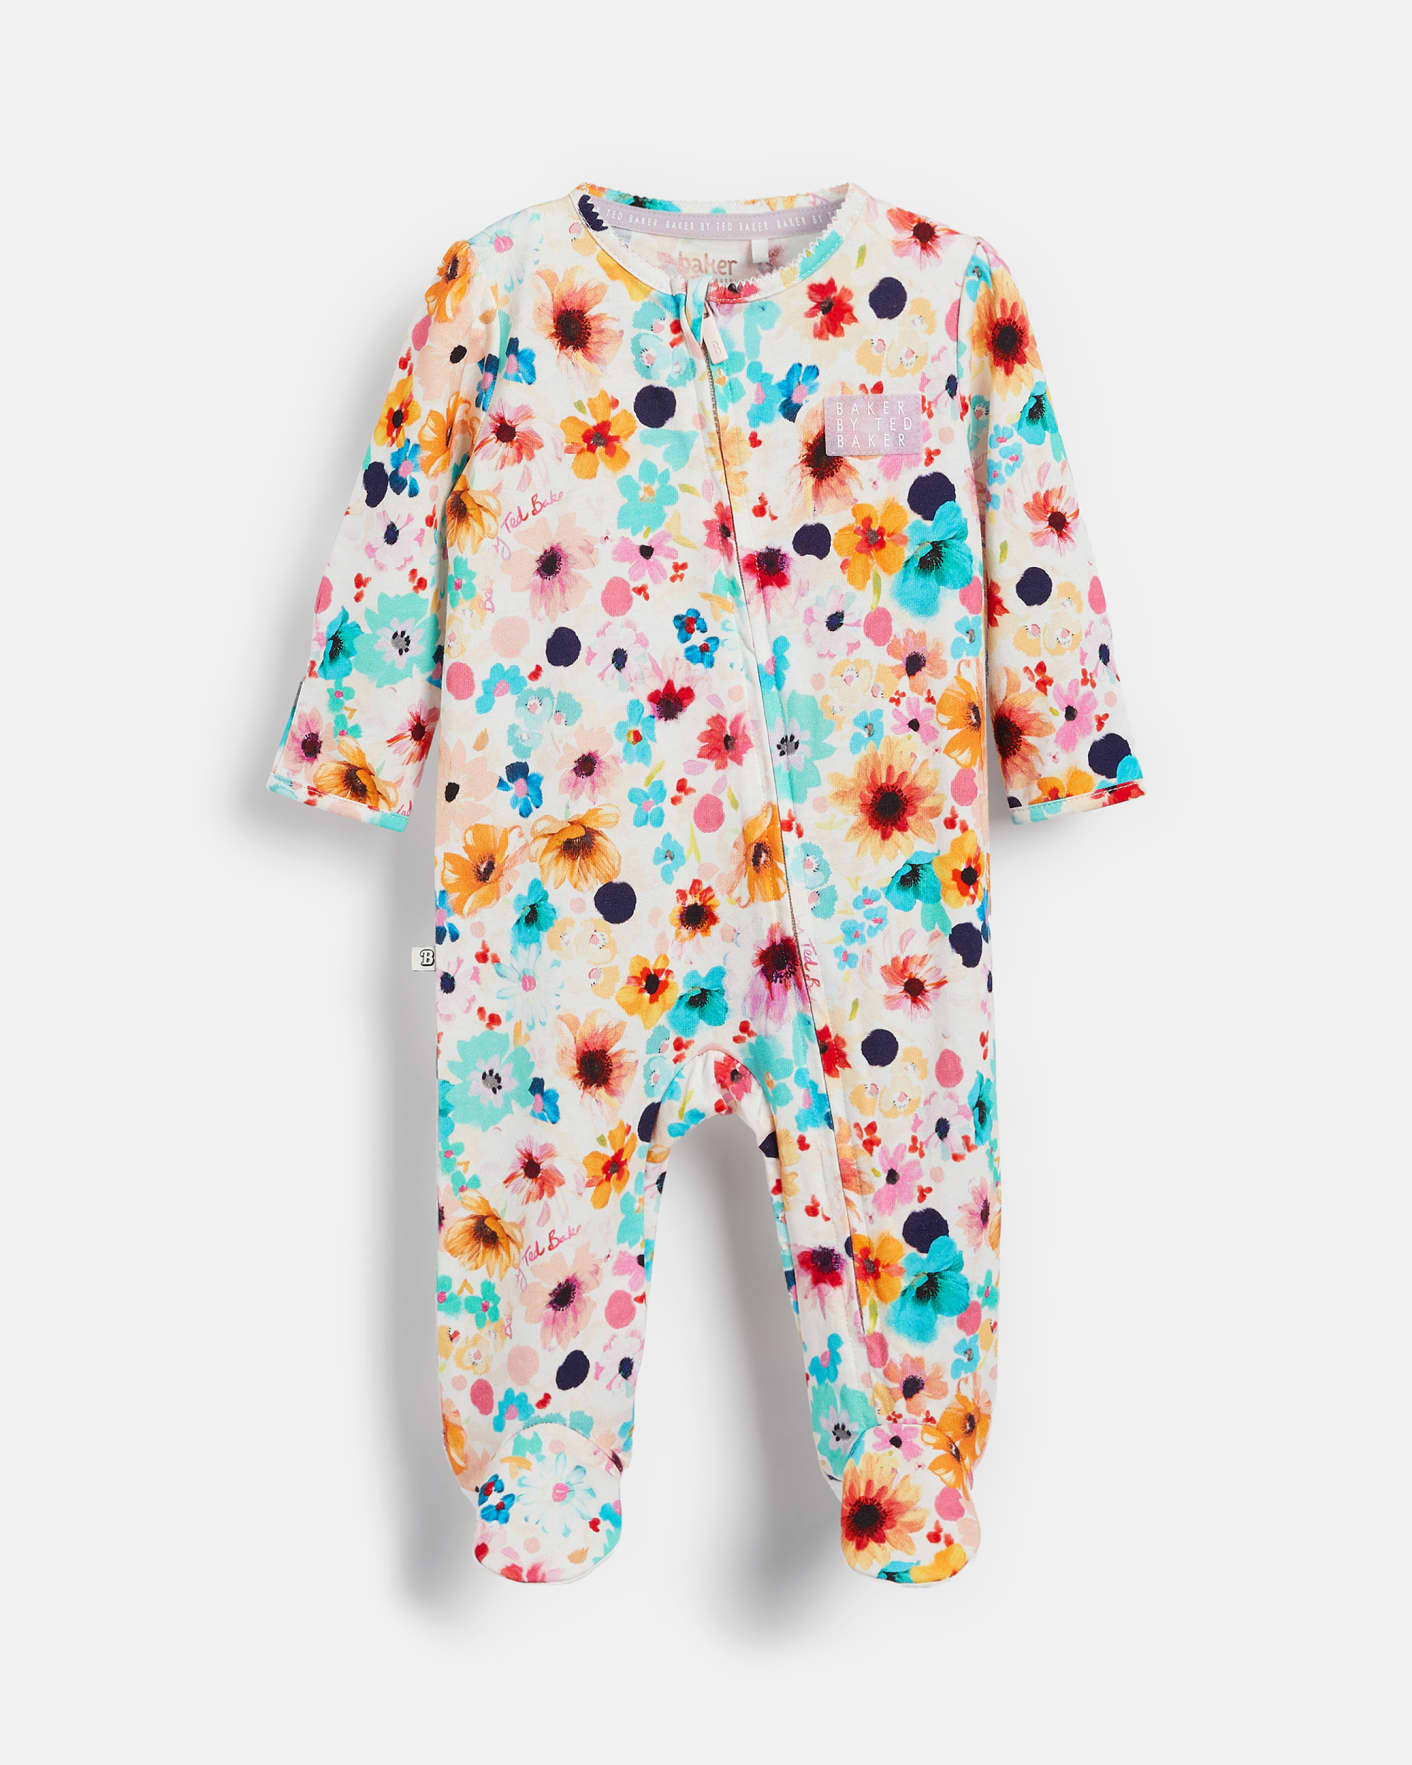 Gemischt All Over Printed Sleepsuit Ted Baker